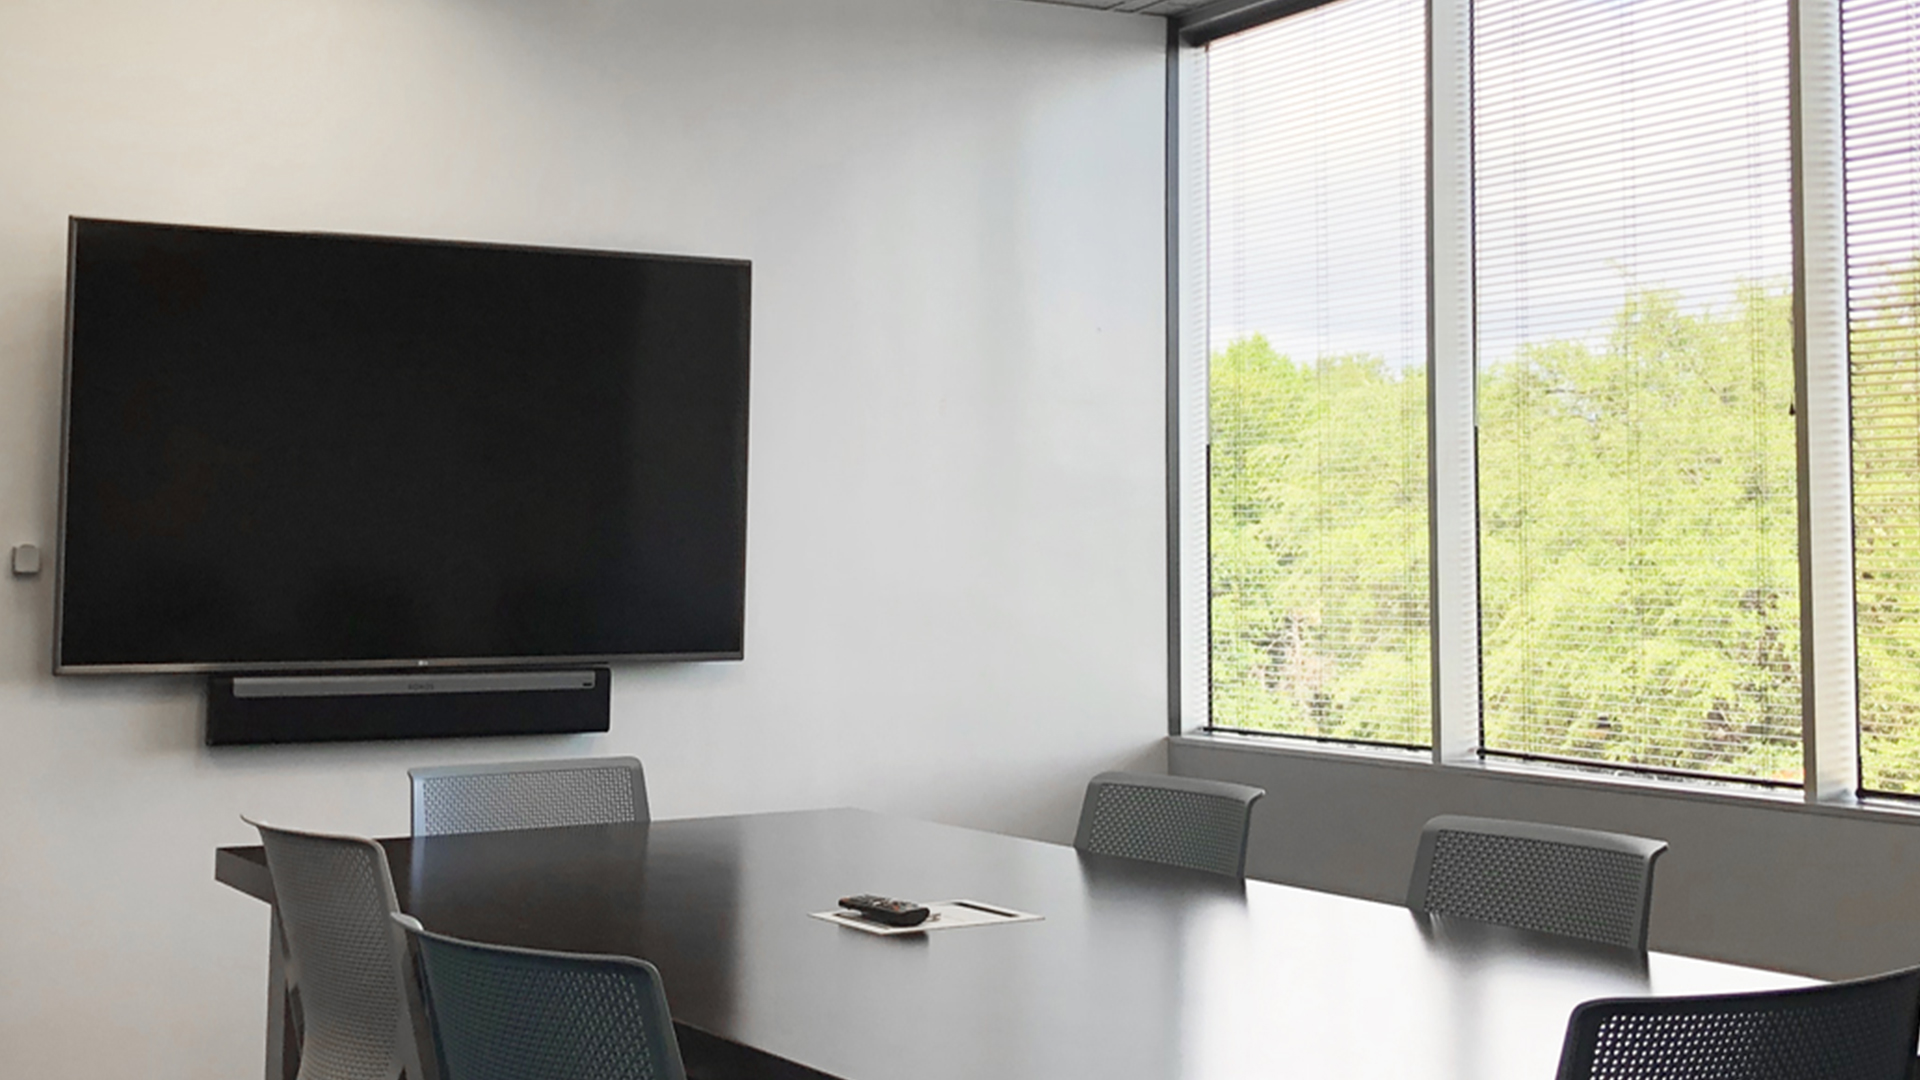 4545 Fuller Drive Conference Room